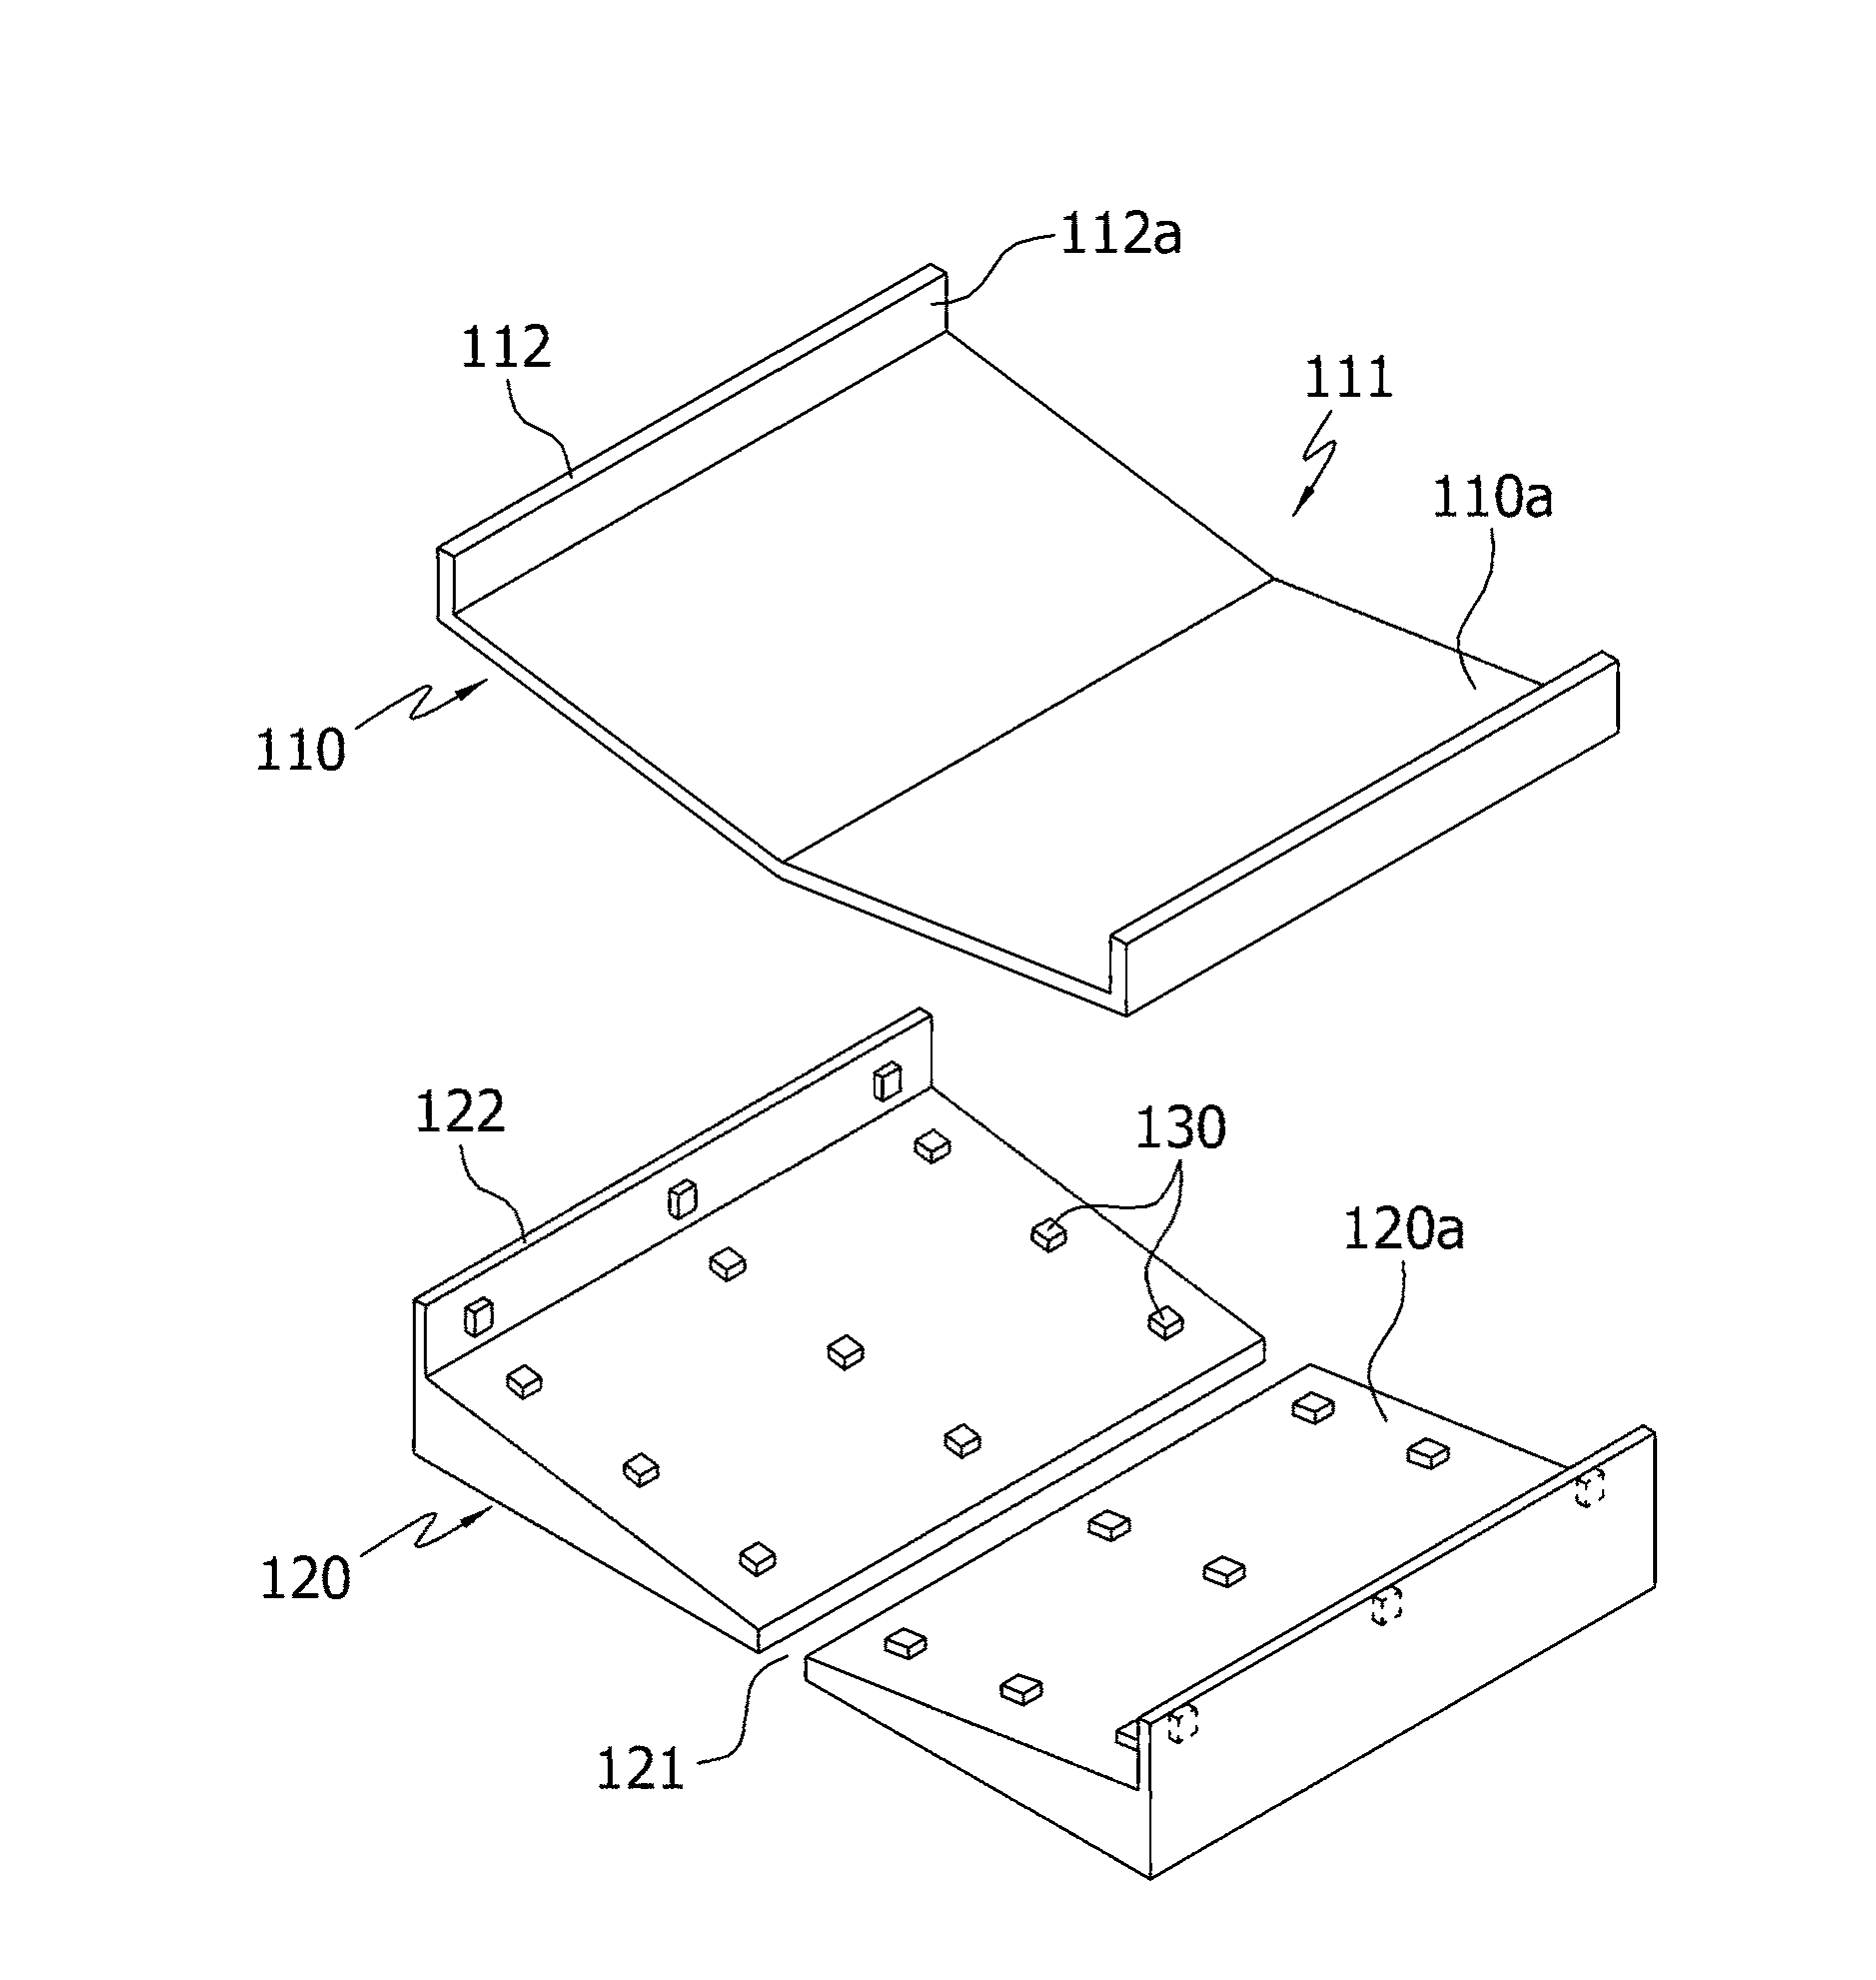 Core catcher having an integrated cooling path